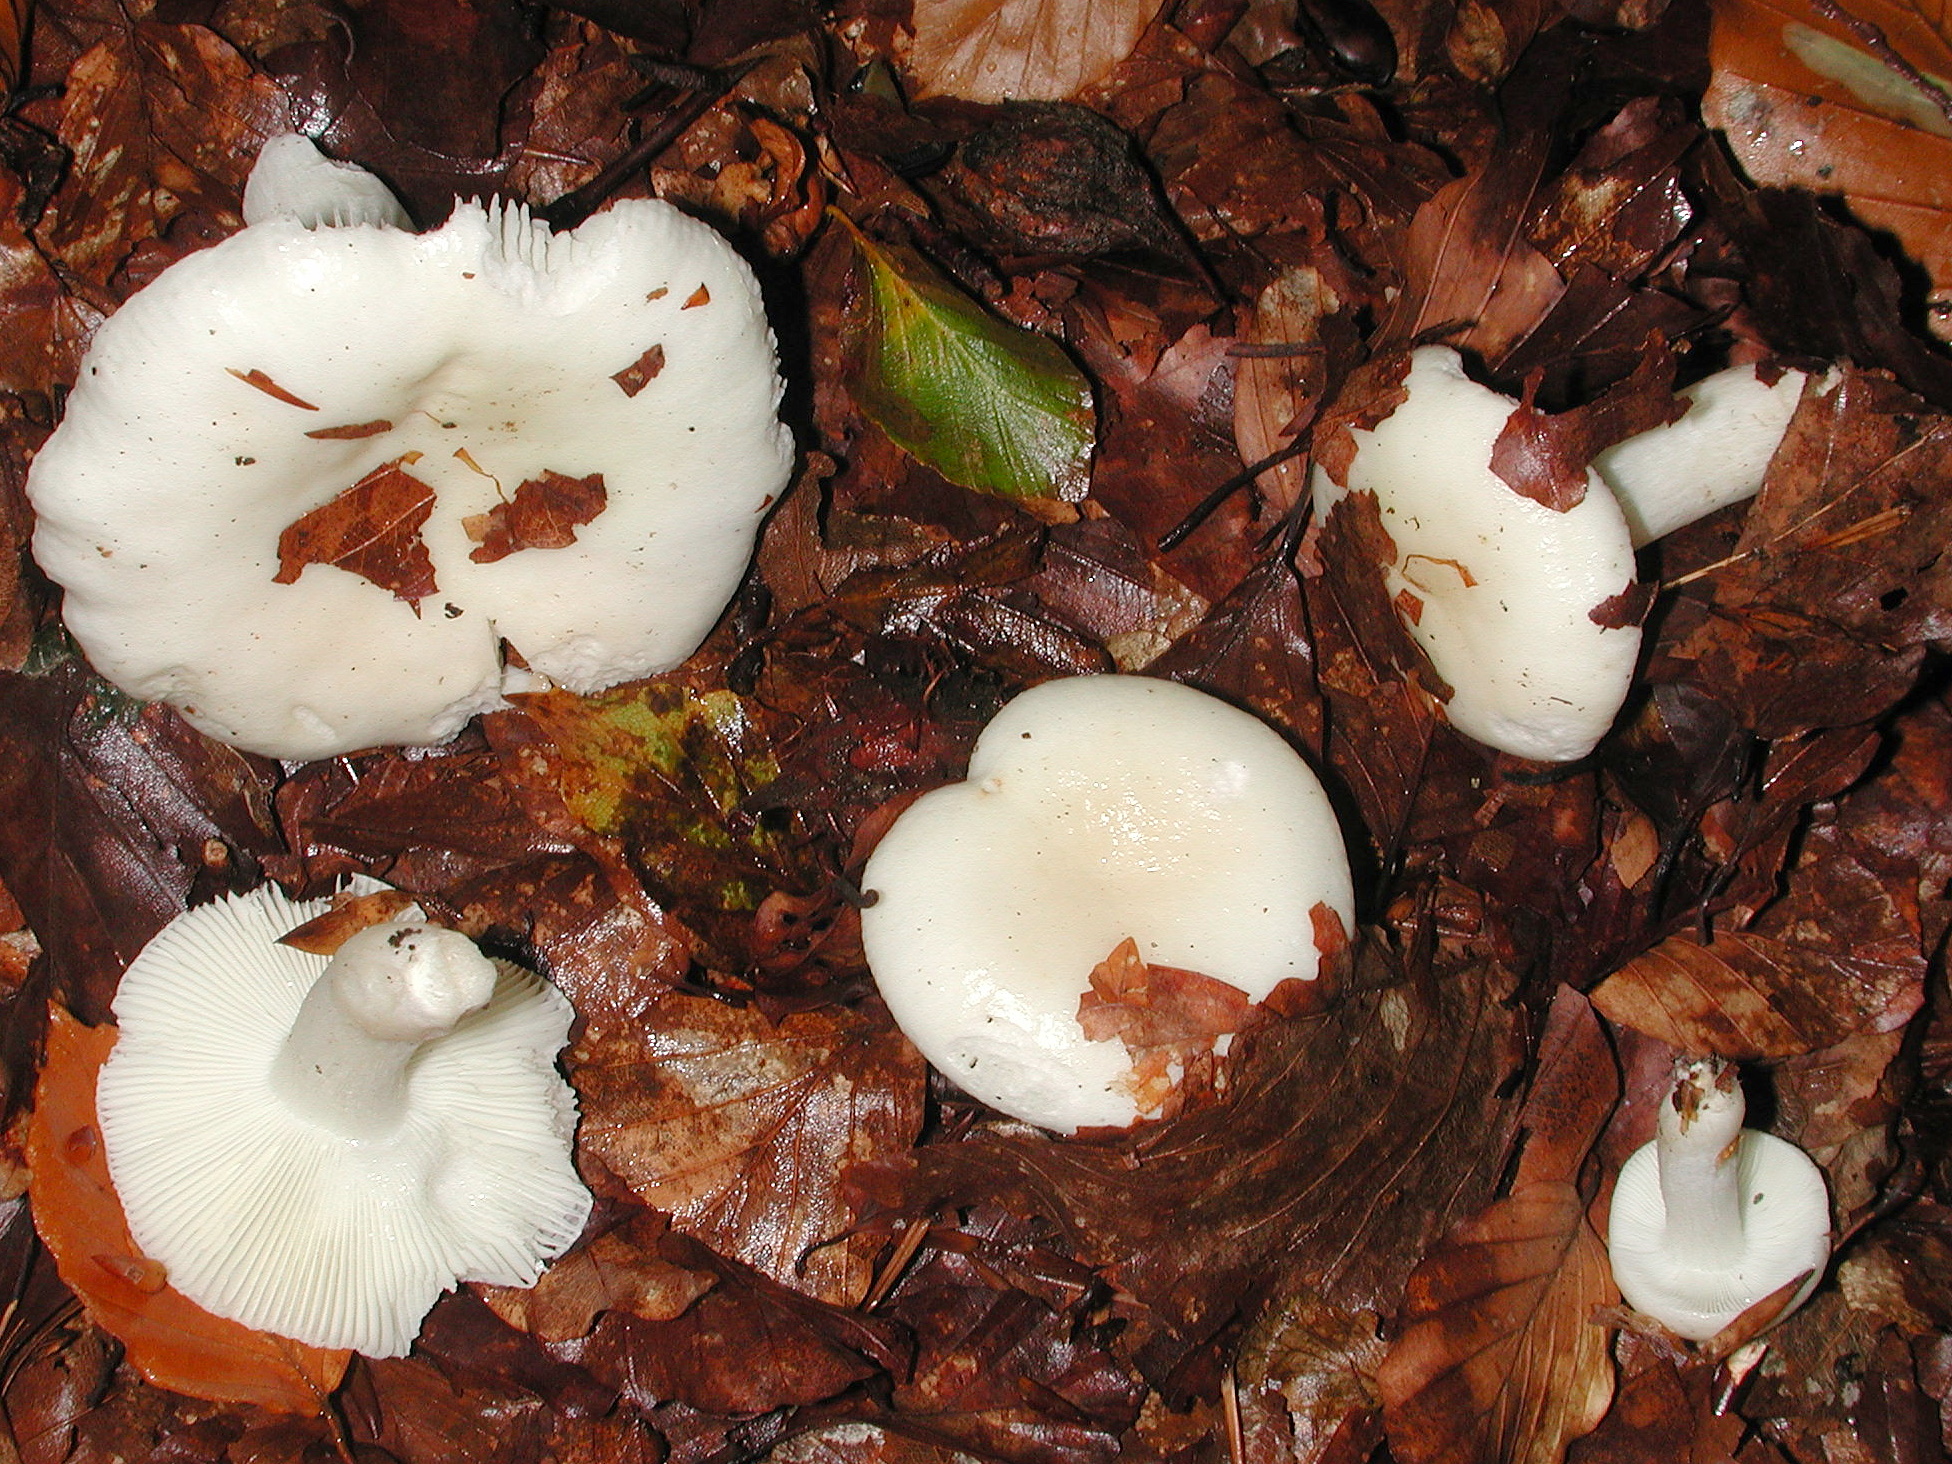 Russula raoultii